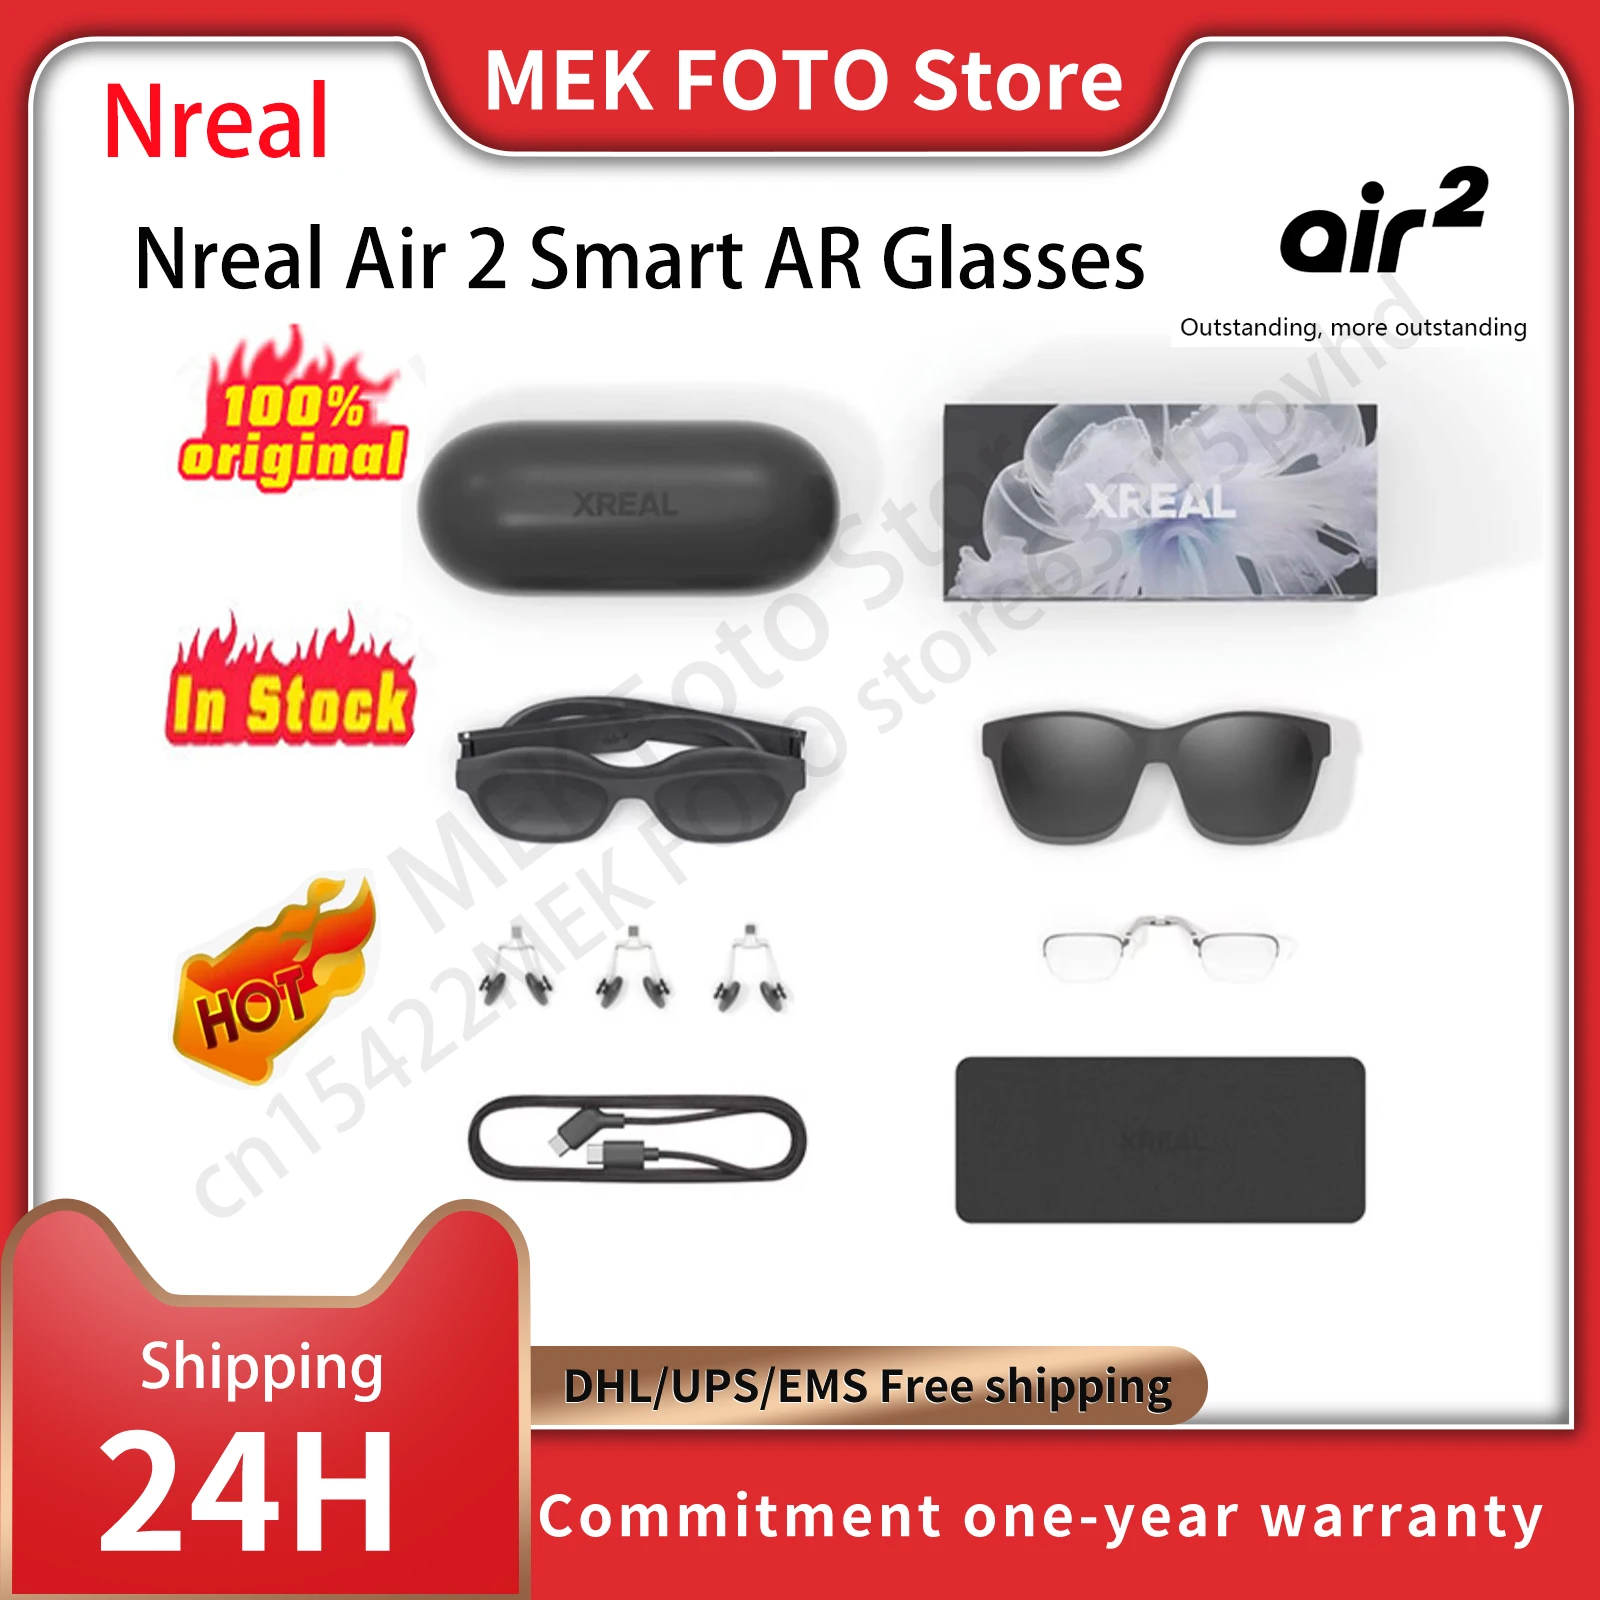 xreal air 2 pro